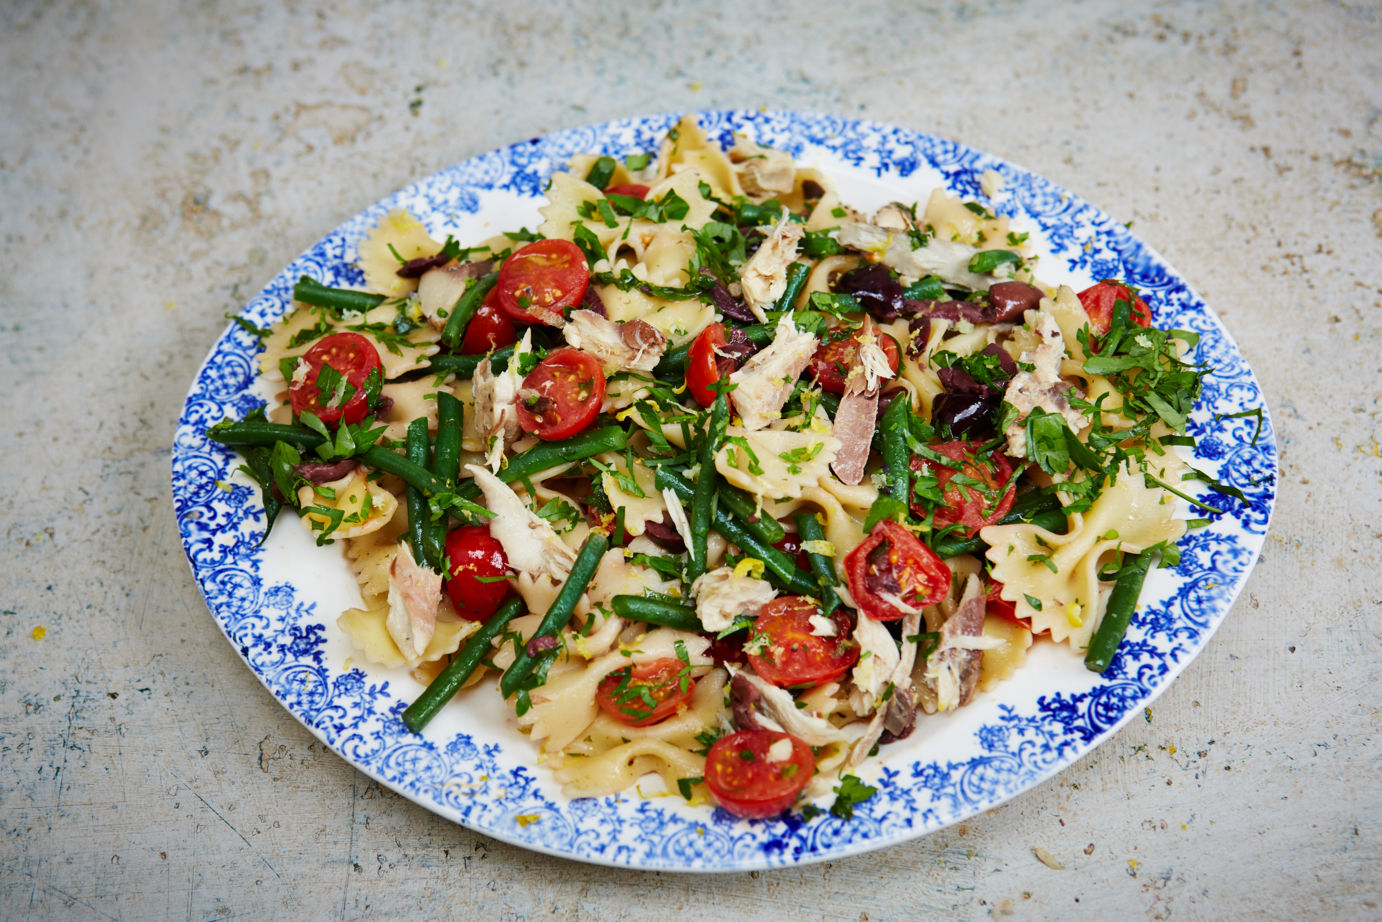 7 summer salad recipes for the week ahead | Features | Jamie Oliver